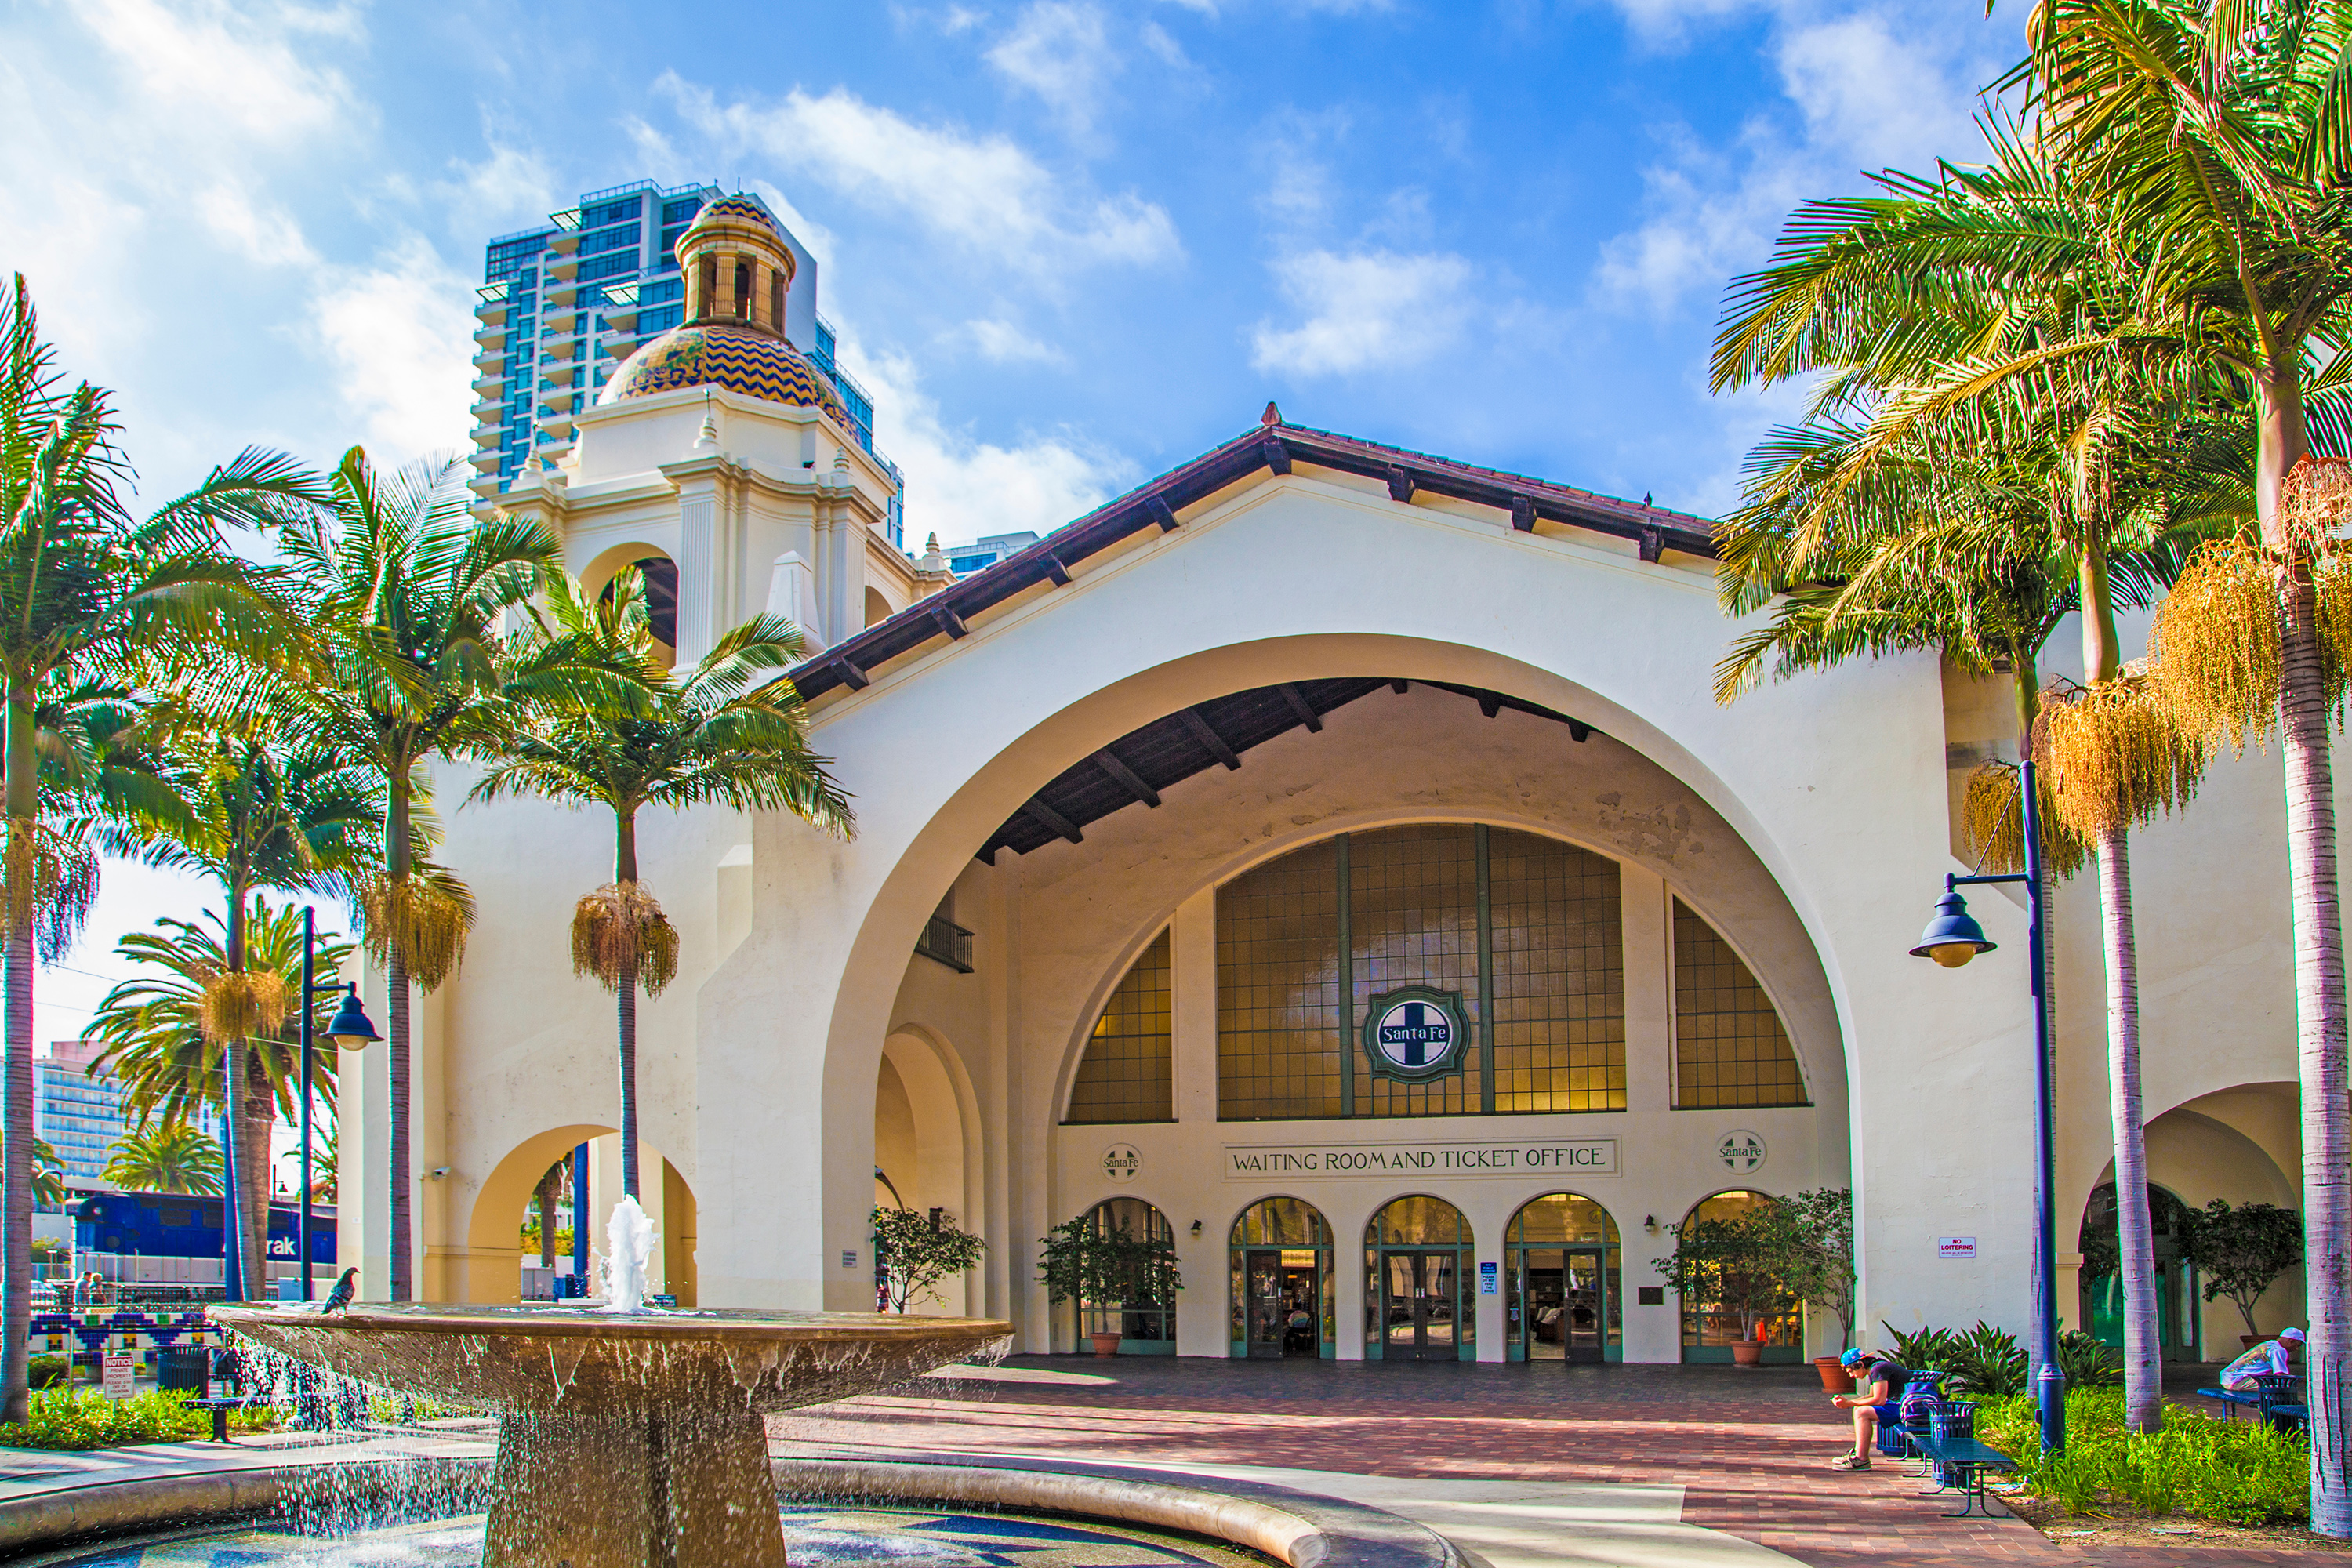 Slide 29 of 29: SAN DIEGO, USA - JUNE 11, 2012: famous Union Station in San Diego, USA. The Spanish Colonial Revival style station opened on March 8, 1915 as Santa Fe Depot.; Shutterstock ID 1053351464; Purchase Order: -